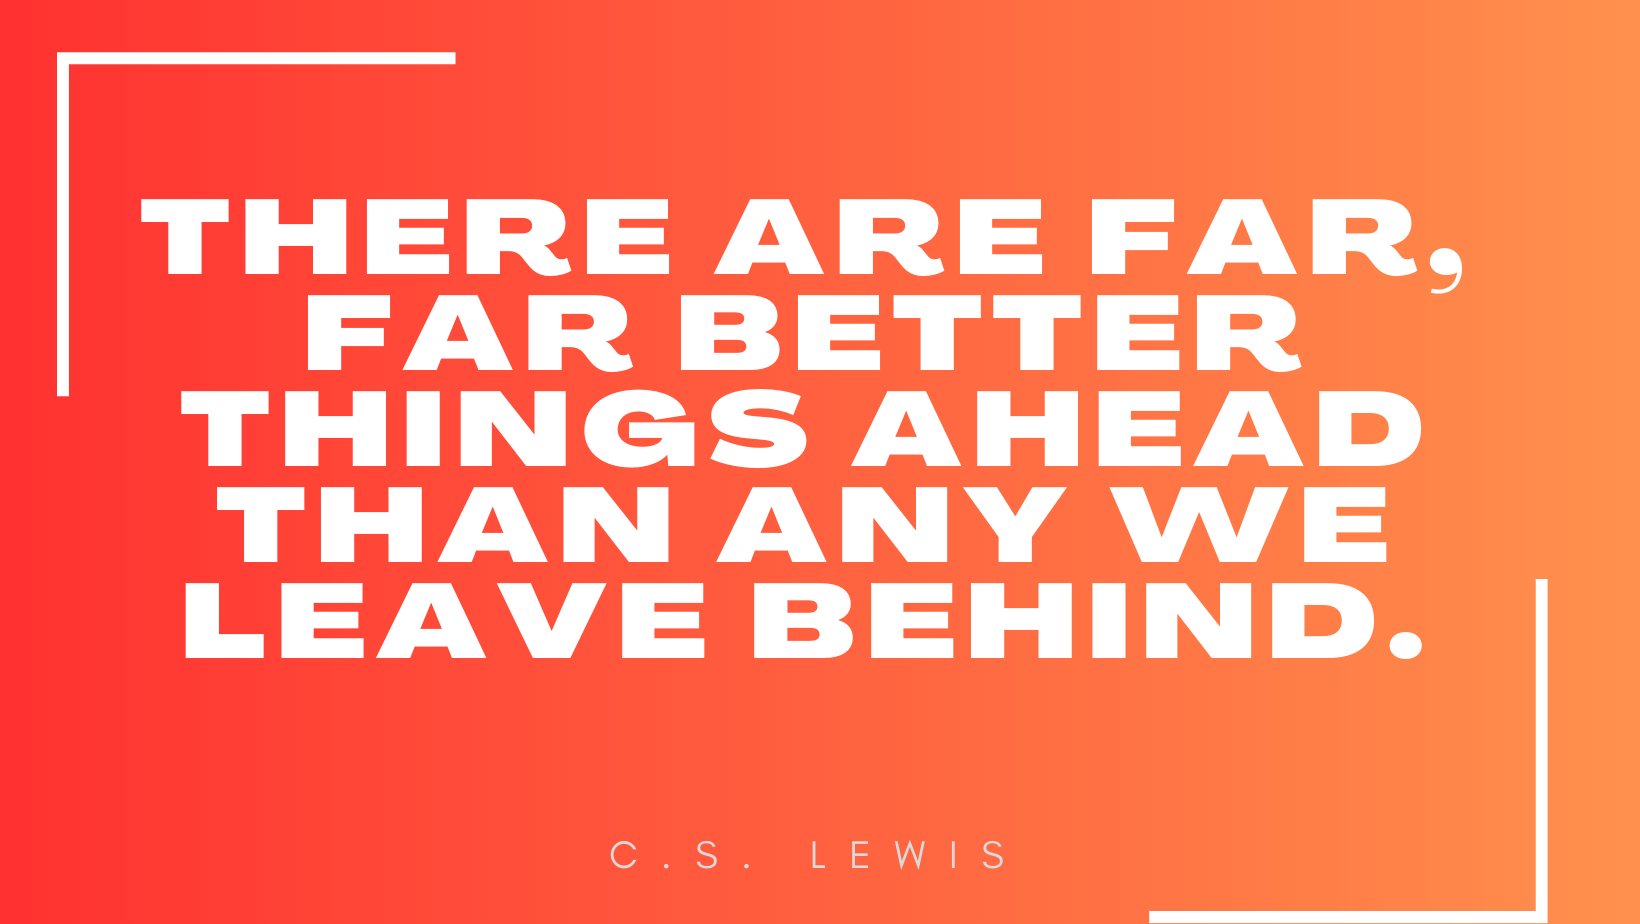 'There are far, far better things ahead than any we leave behind.'